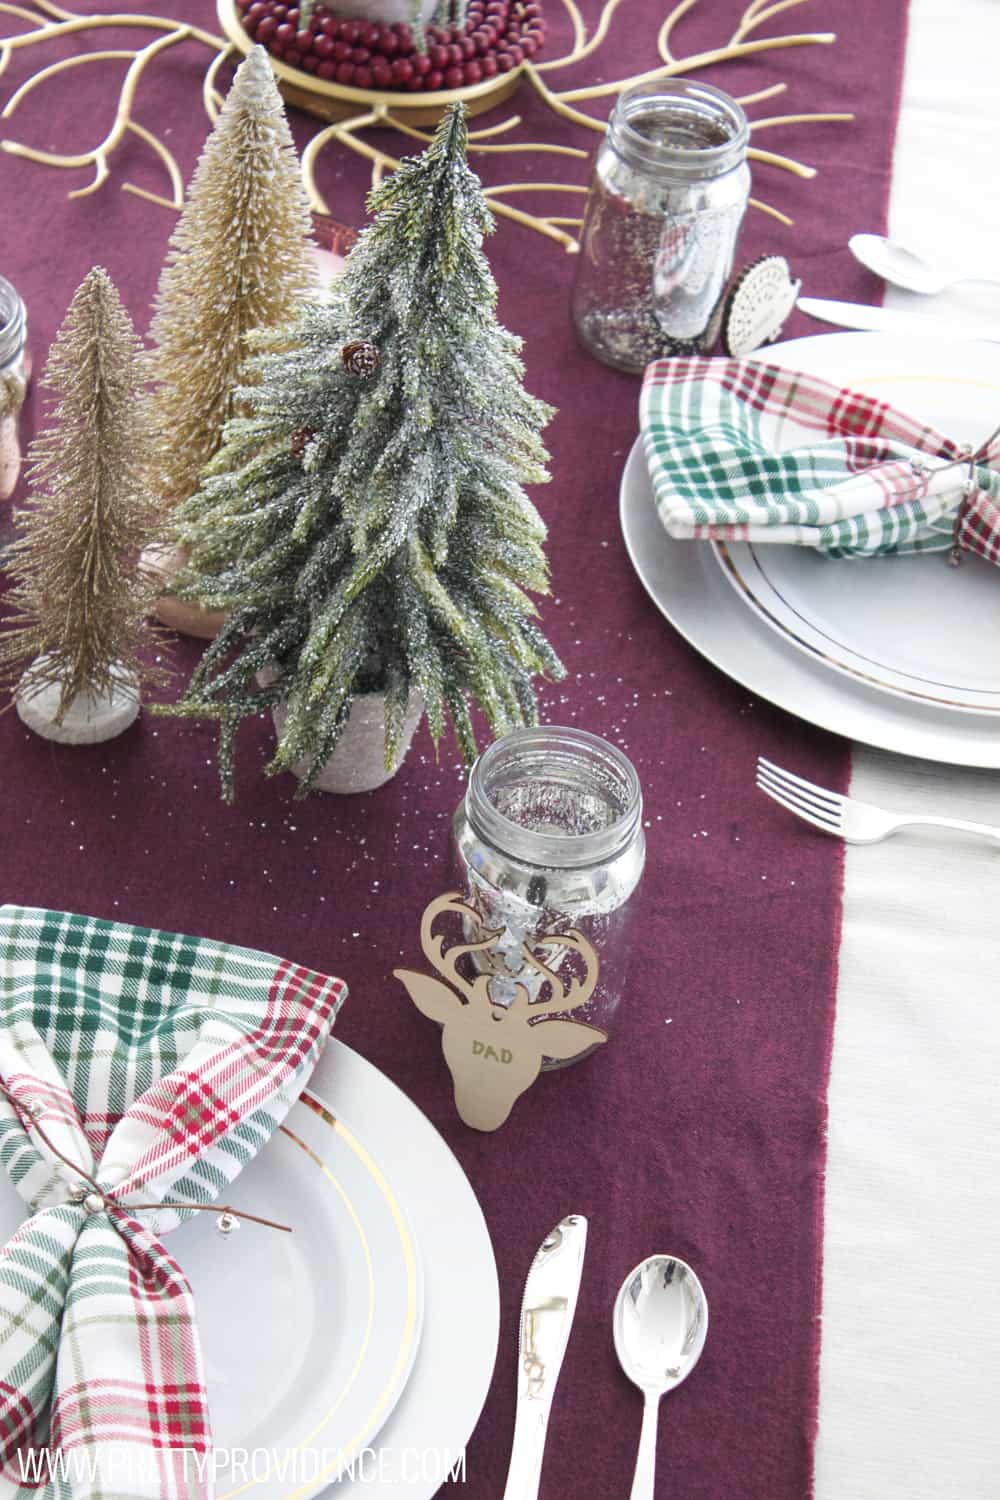 Loving this simple holiday tablescape! Whimsically beautiful, with items I'll use again and again! 